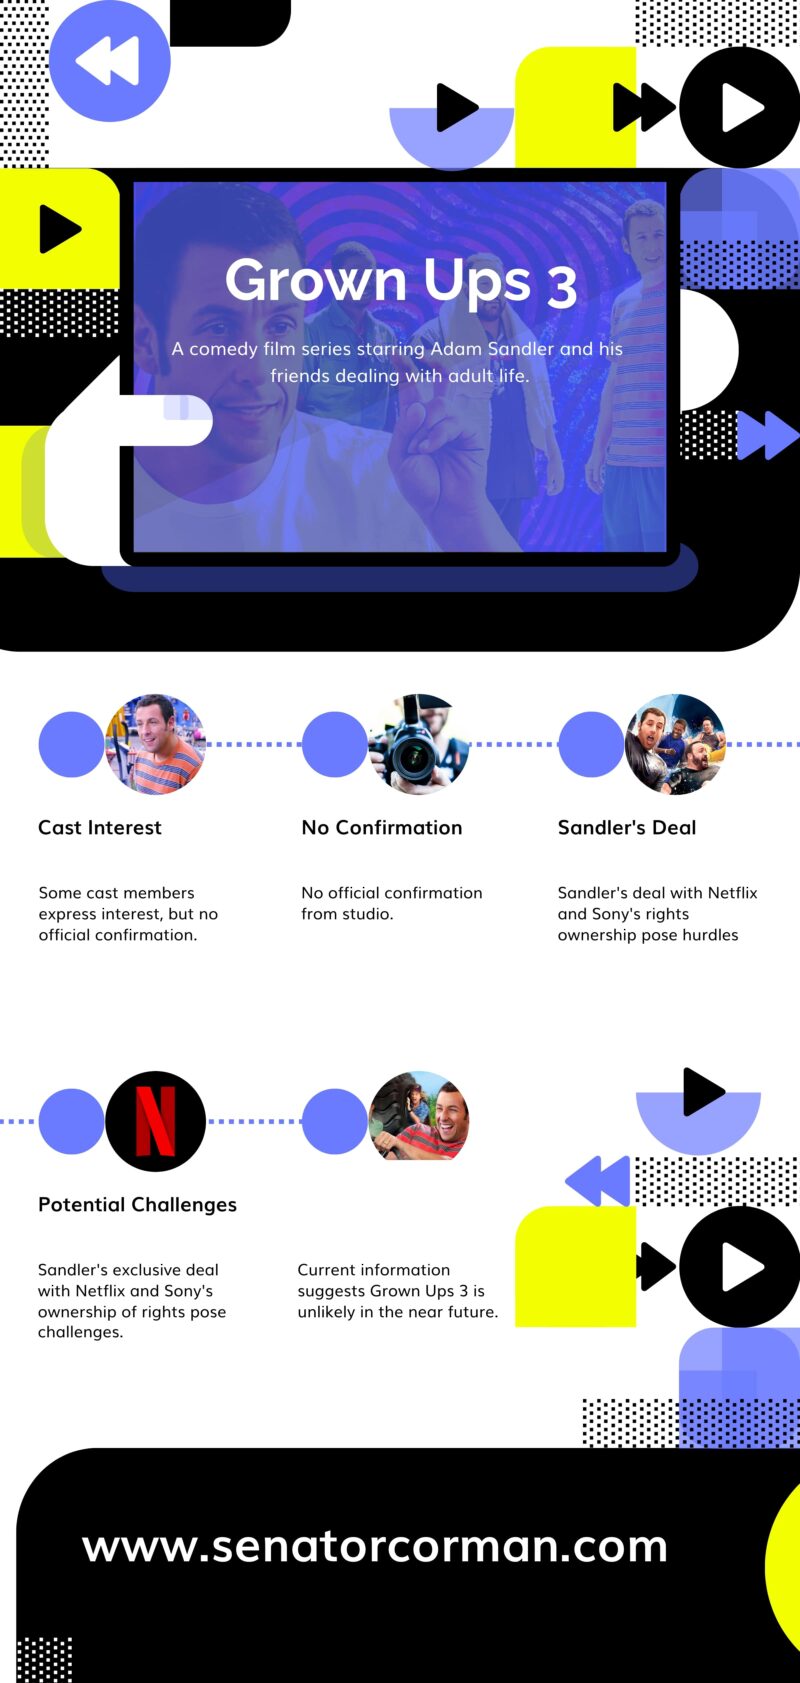 Grown Ups 3 infographic